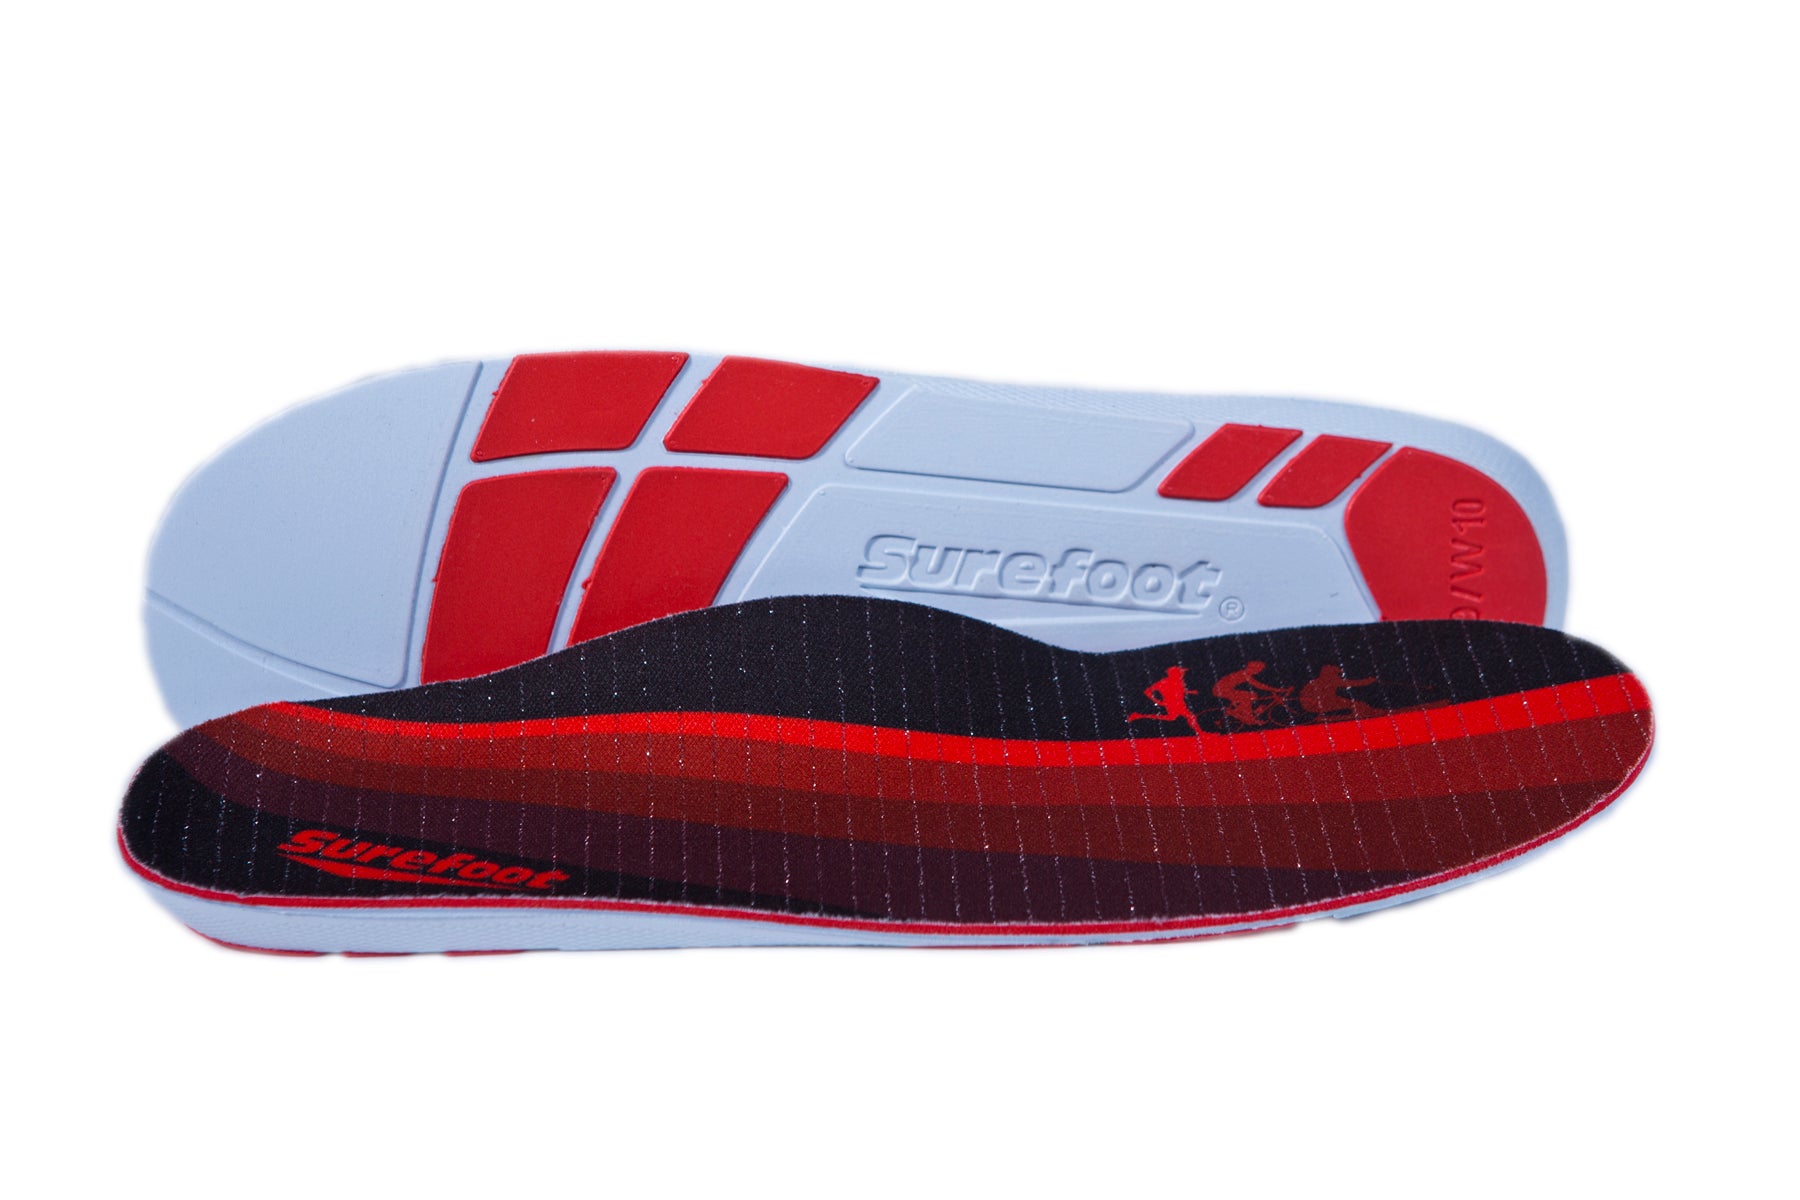 Red Surefoot Conforma Insole, Surefoot logo underneath and on top sheet.